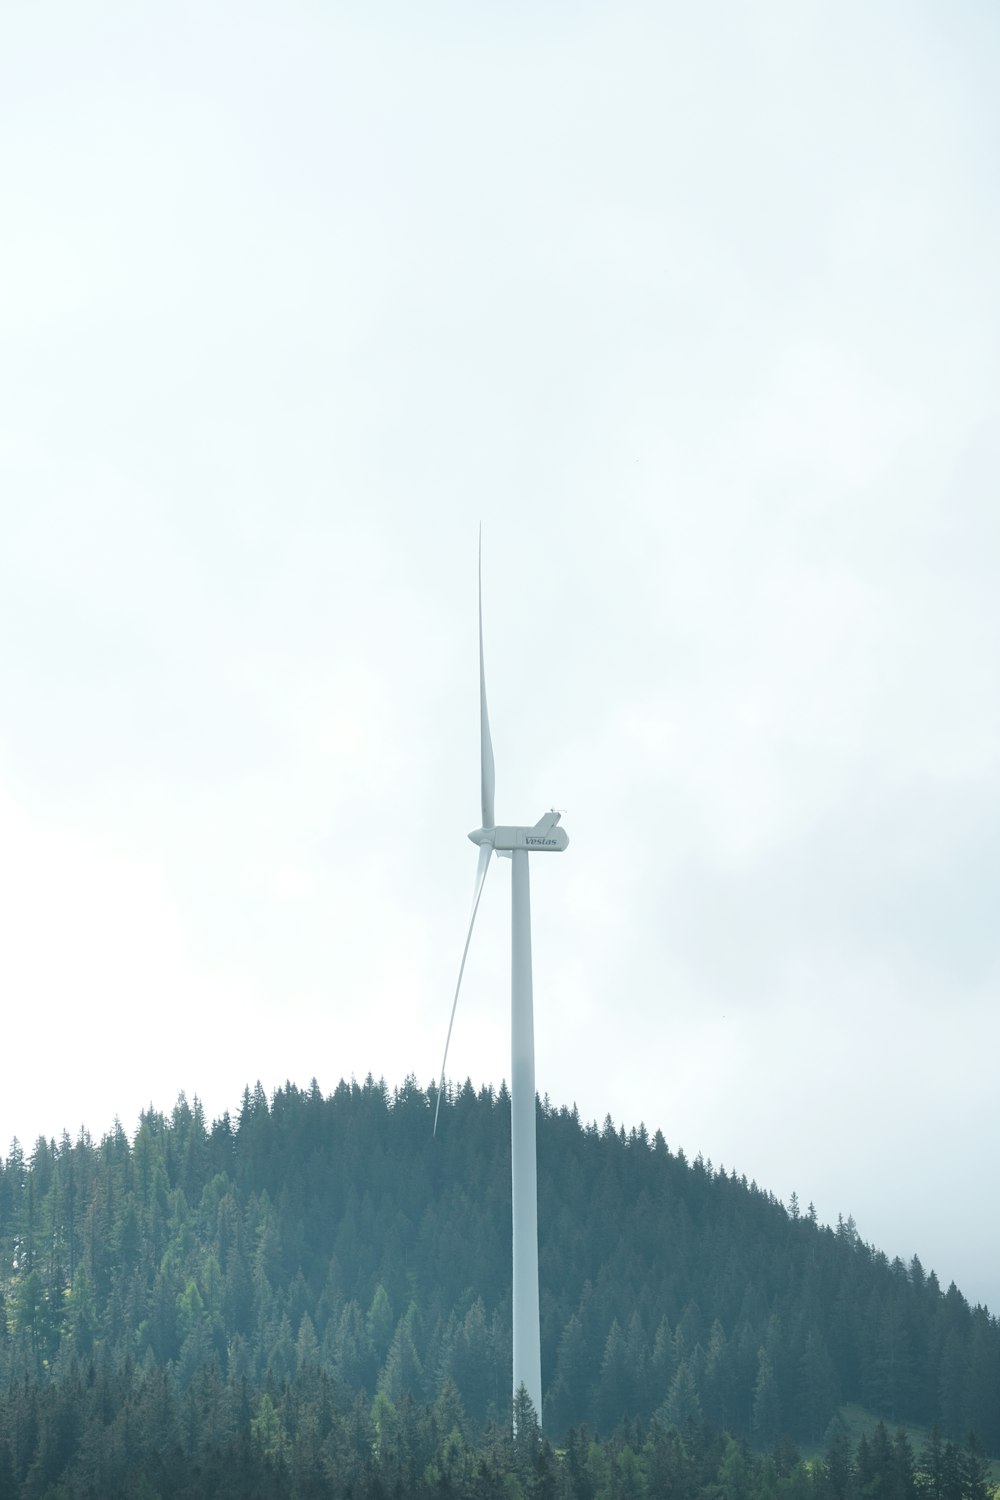 a wind turbine on a hill with trees in the background